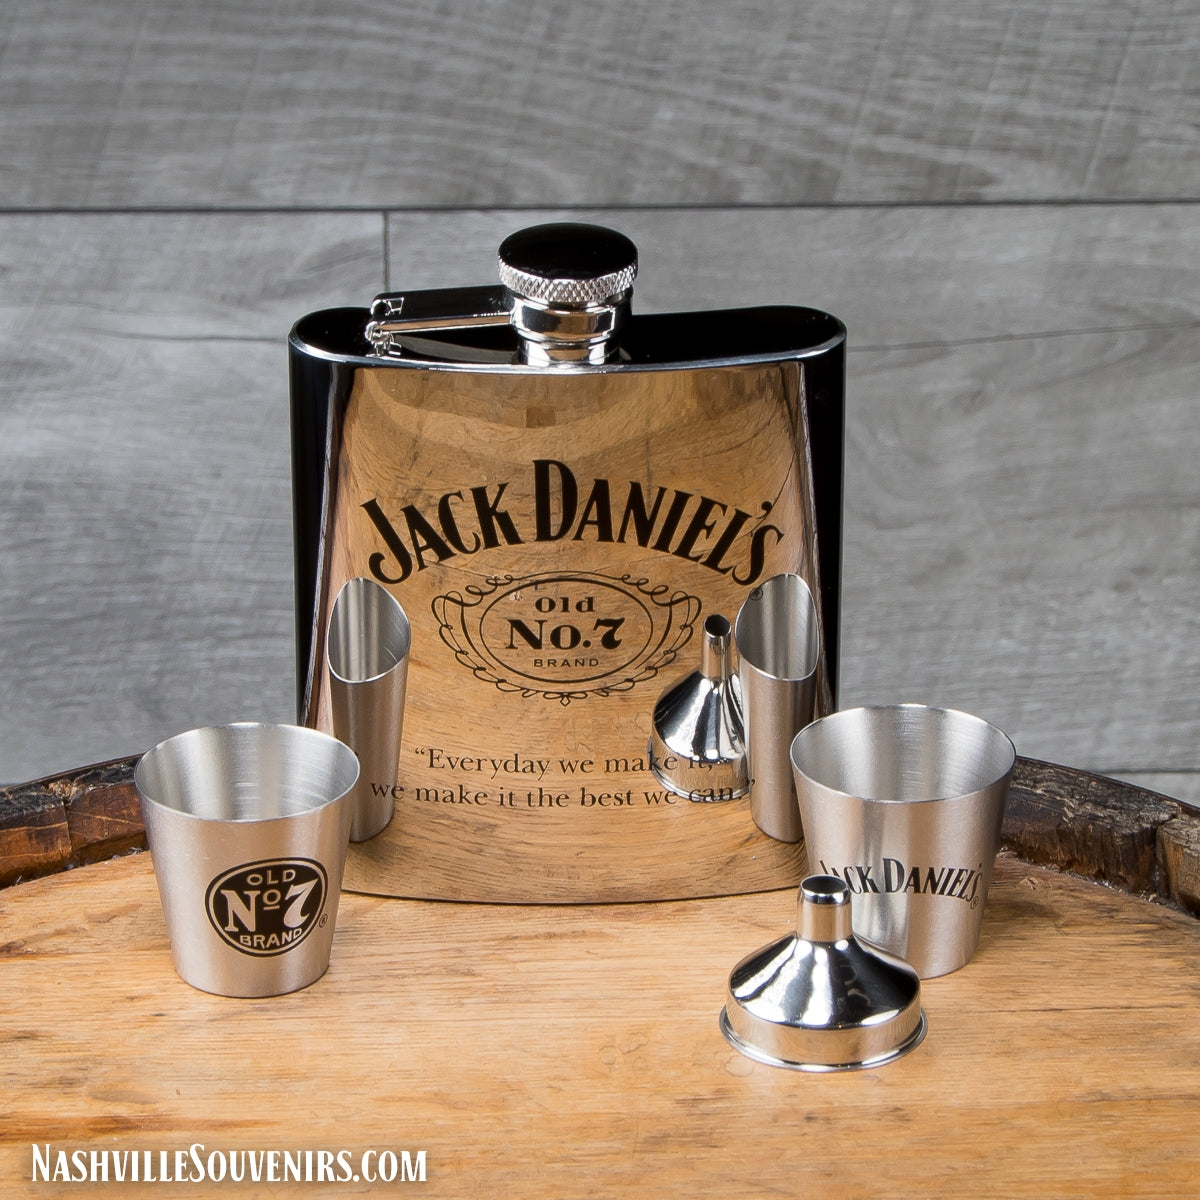 Officially licensed Jack Daniels Gift Set with Mirror Finish Flask, Shots and Funnel.  FREE SHIPPING on all US orders over $75!